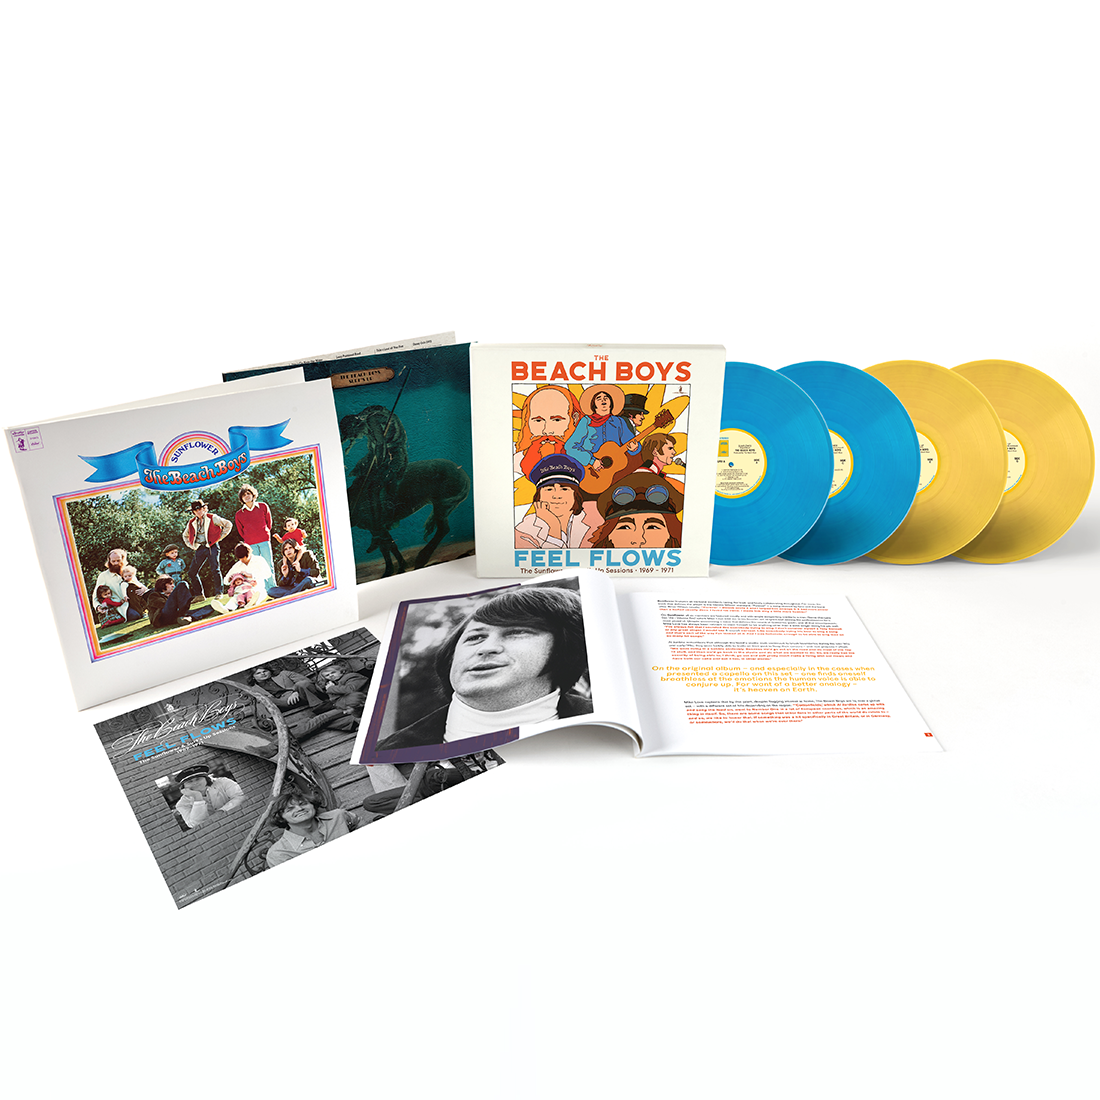 Beach Boys - Feel Flows - The Sunflower & Surf’s Up Sessions 1969-1971: Exclusive Translucent Blue + Yellow Vinyl Box Set 4LP